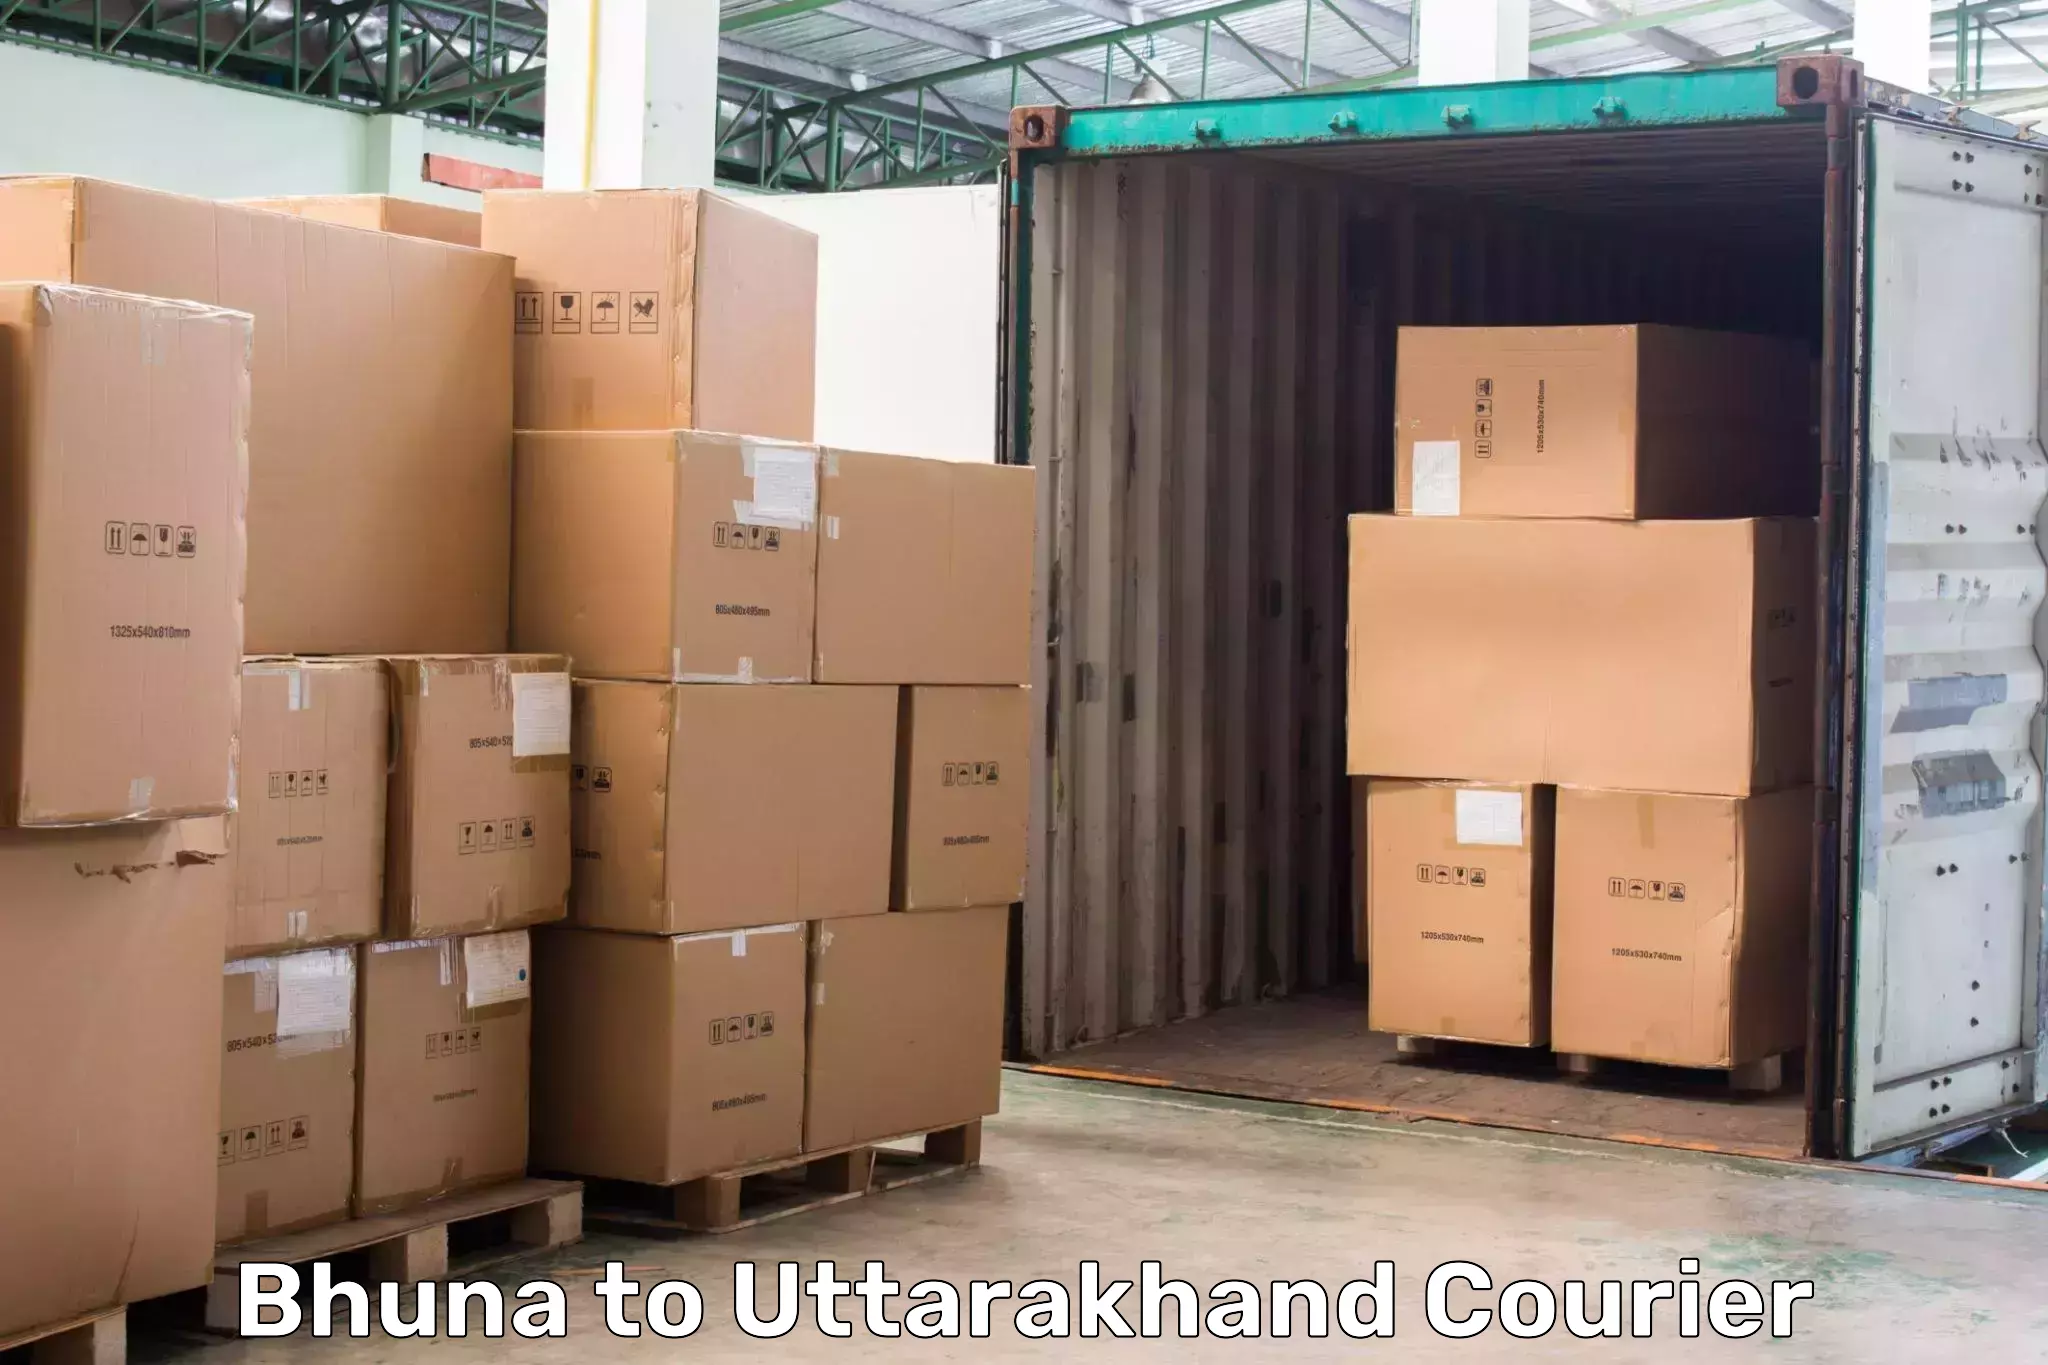 Local courier options Bhuna to Haridwar